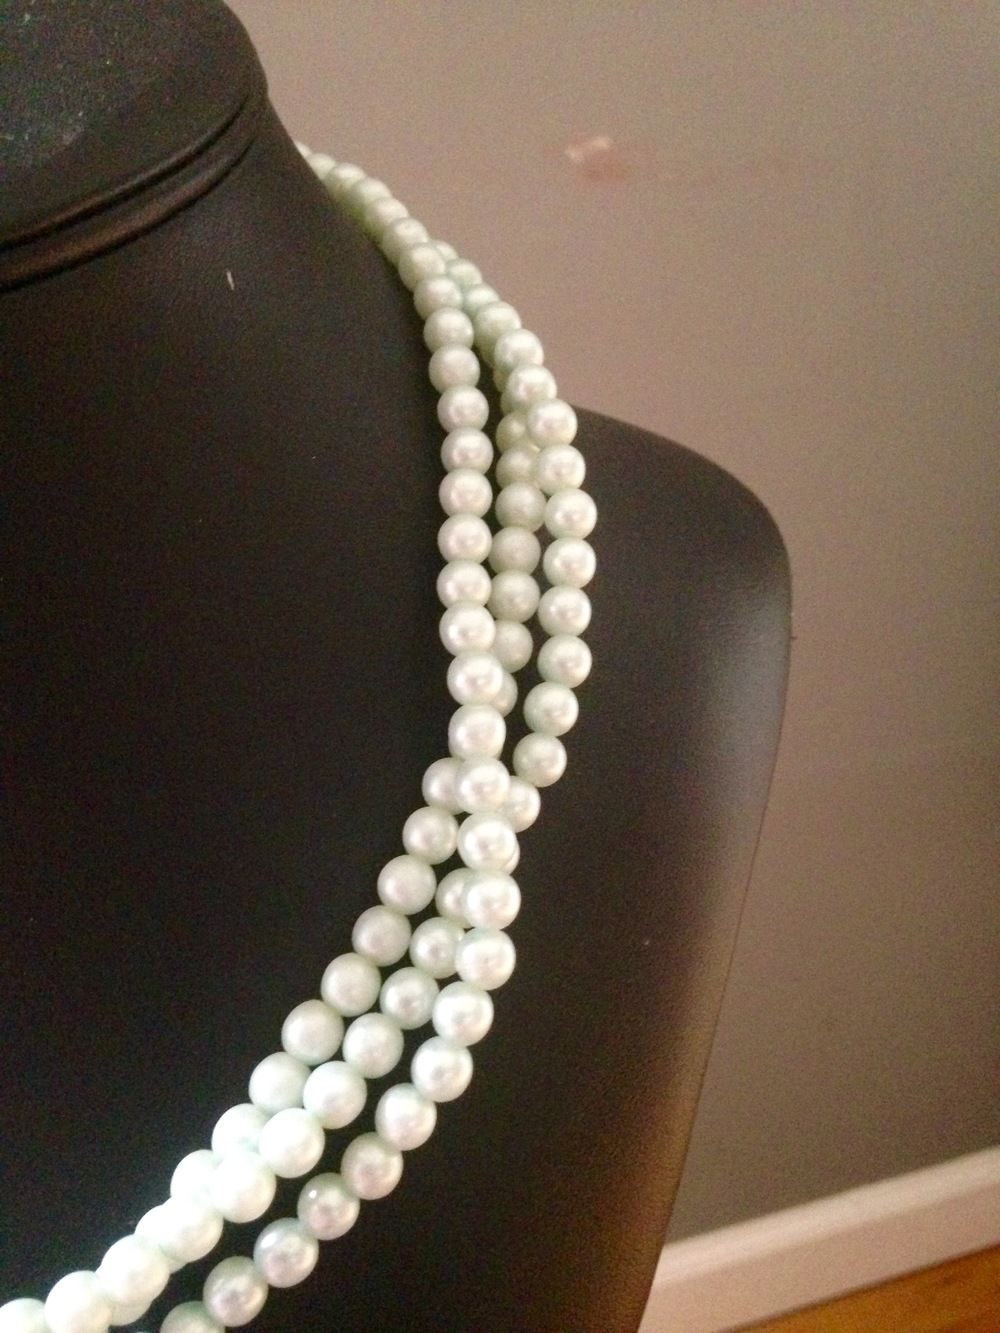 Long Faux Pearl Necklace